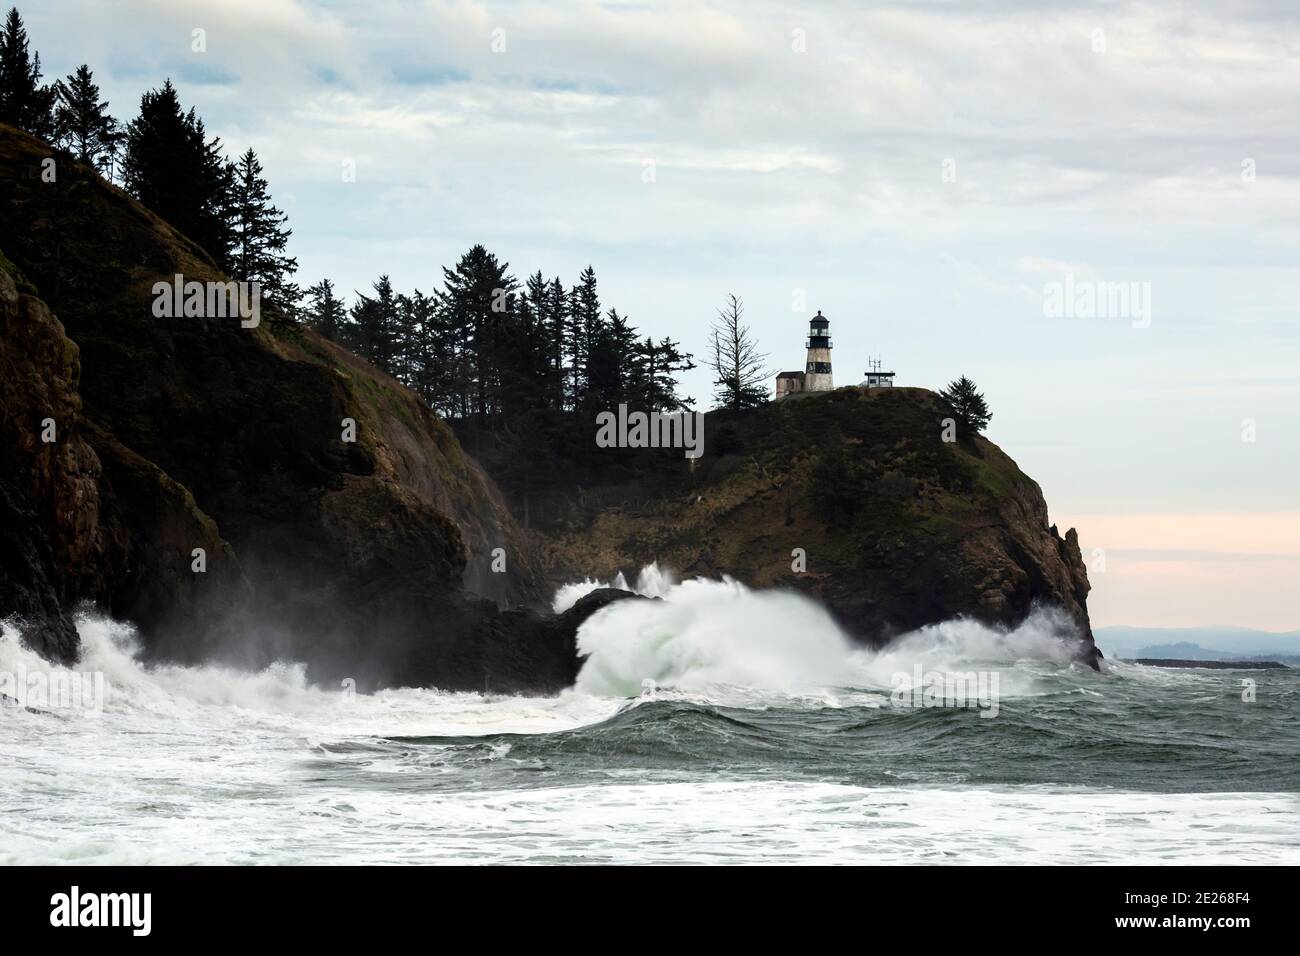 WA19101-00...WASHINGTON - Wellen schlagen in Klippen am Columbia River Abfluss unter Cape Disappointment Lighthouse in Cape Disappointment State P Stockfoto